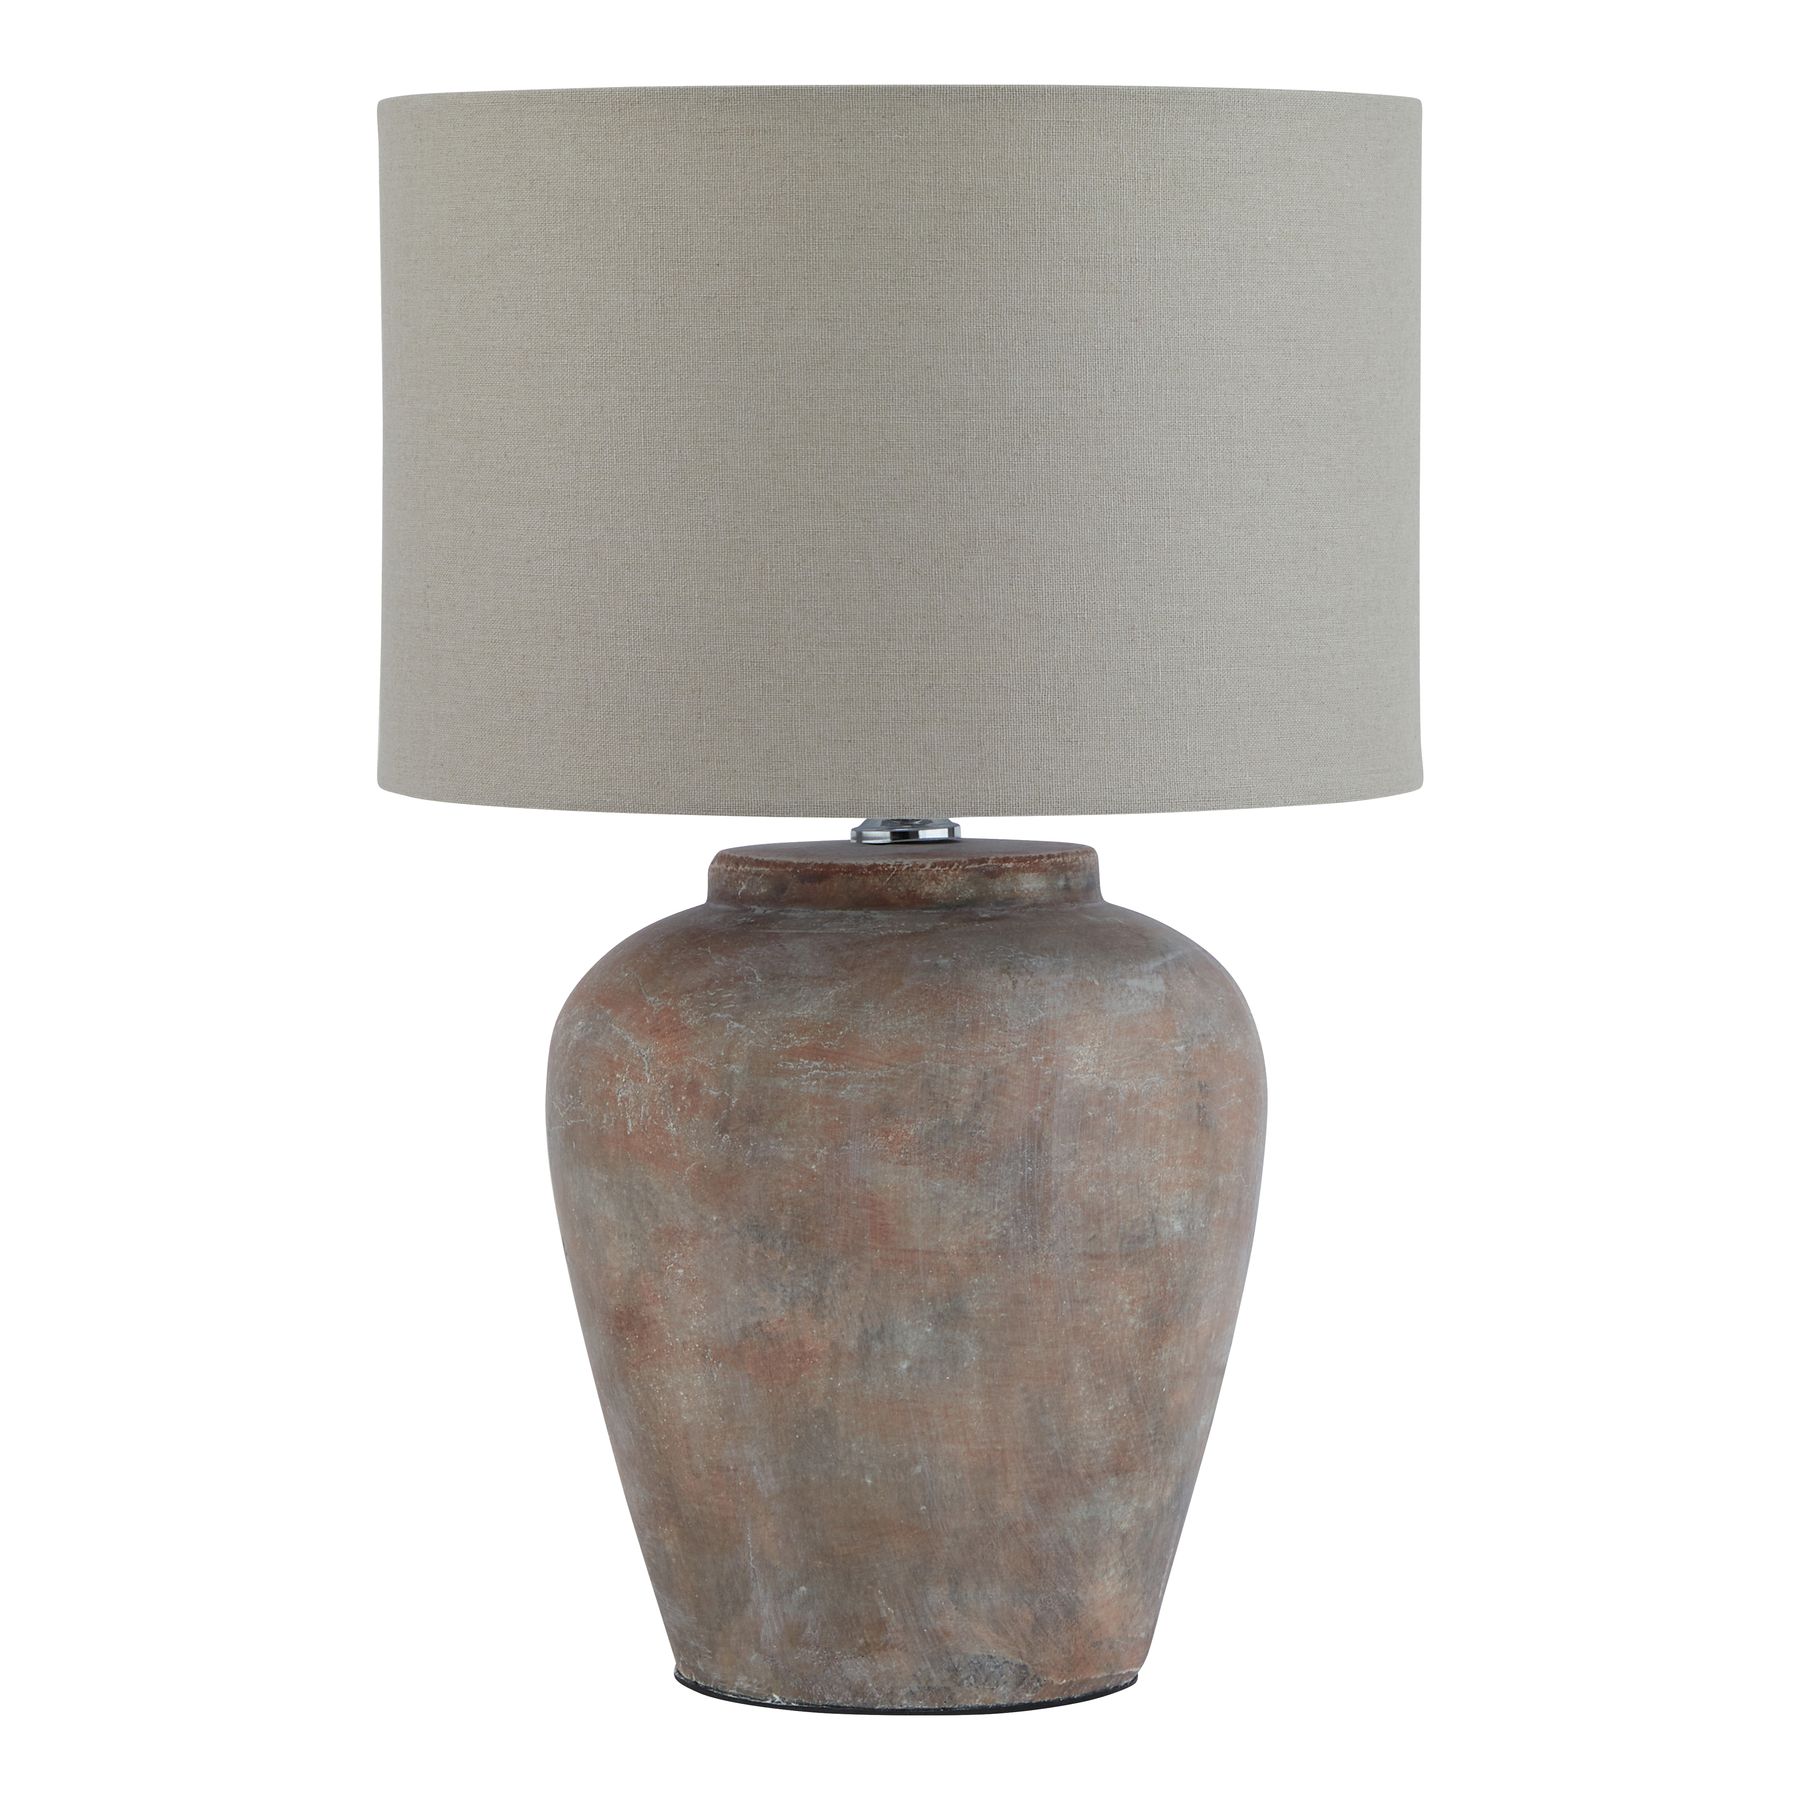 Siena Brown Table Lamp With Linen Shade - Image 1